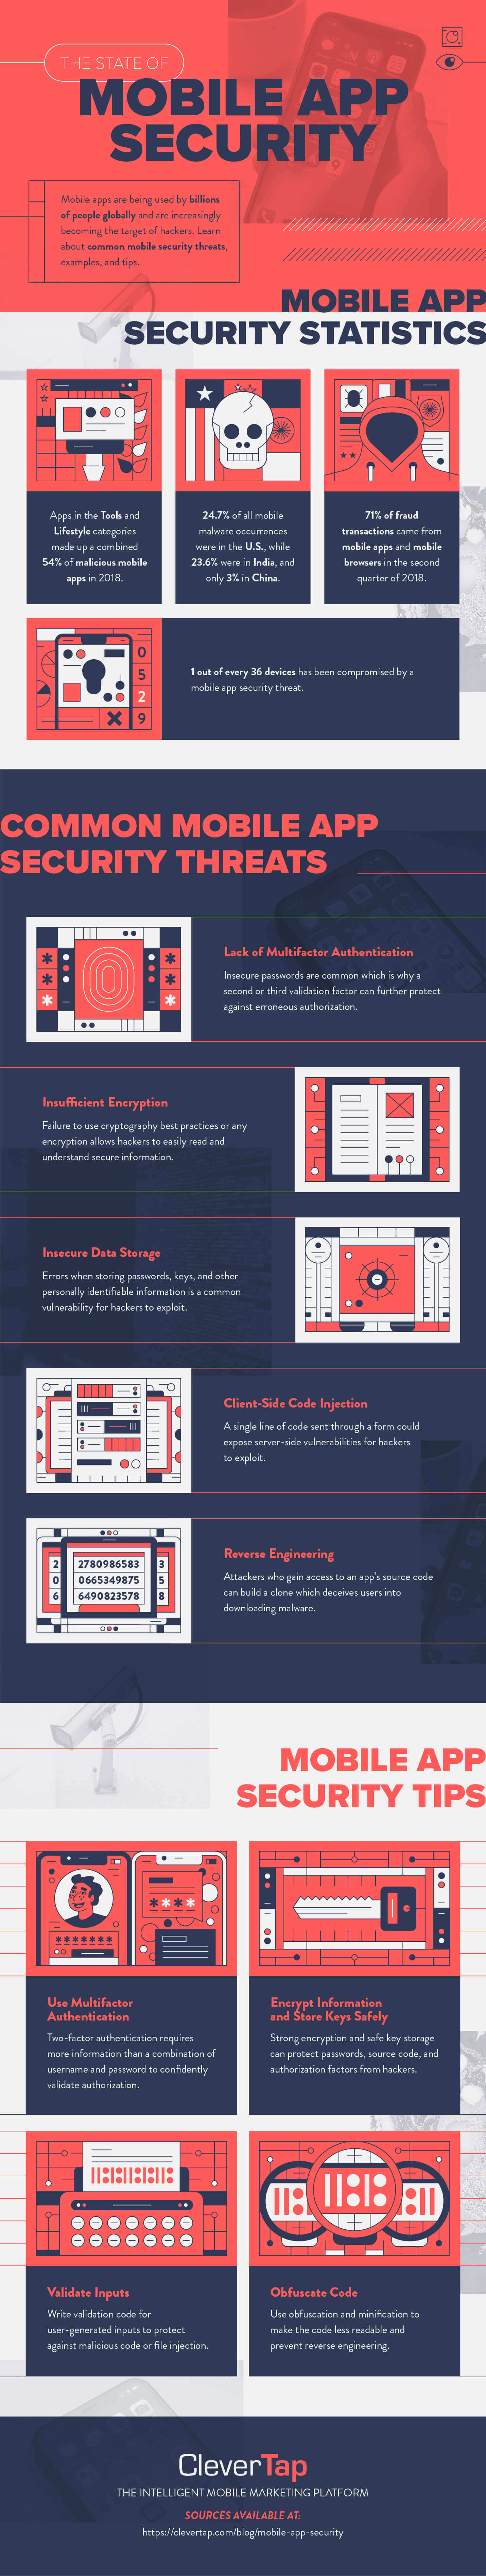 mobile app security best practices full infographic